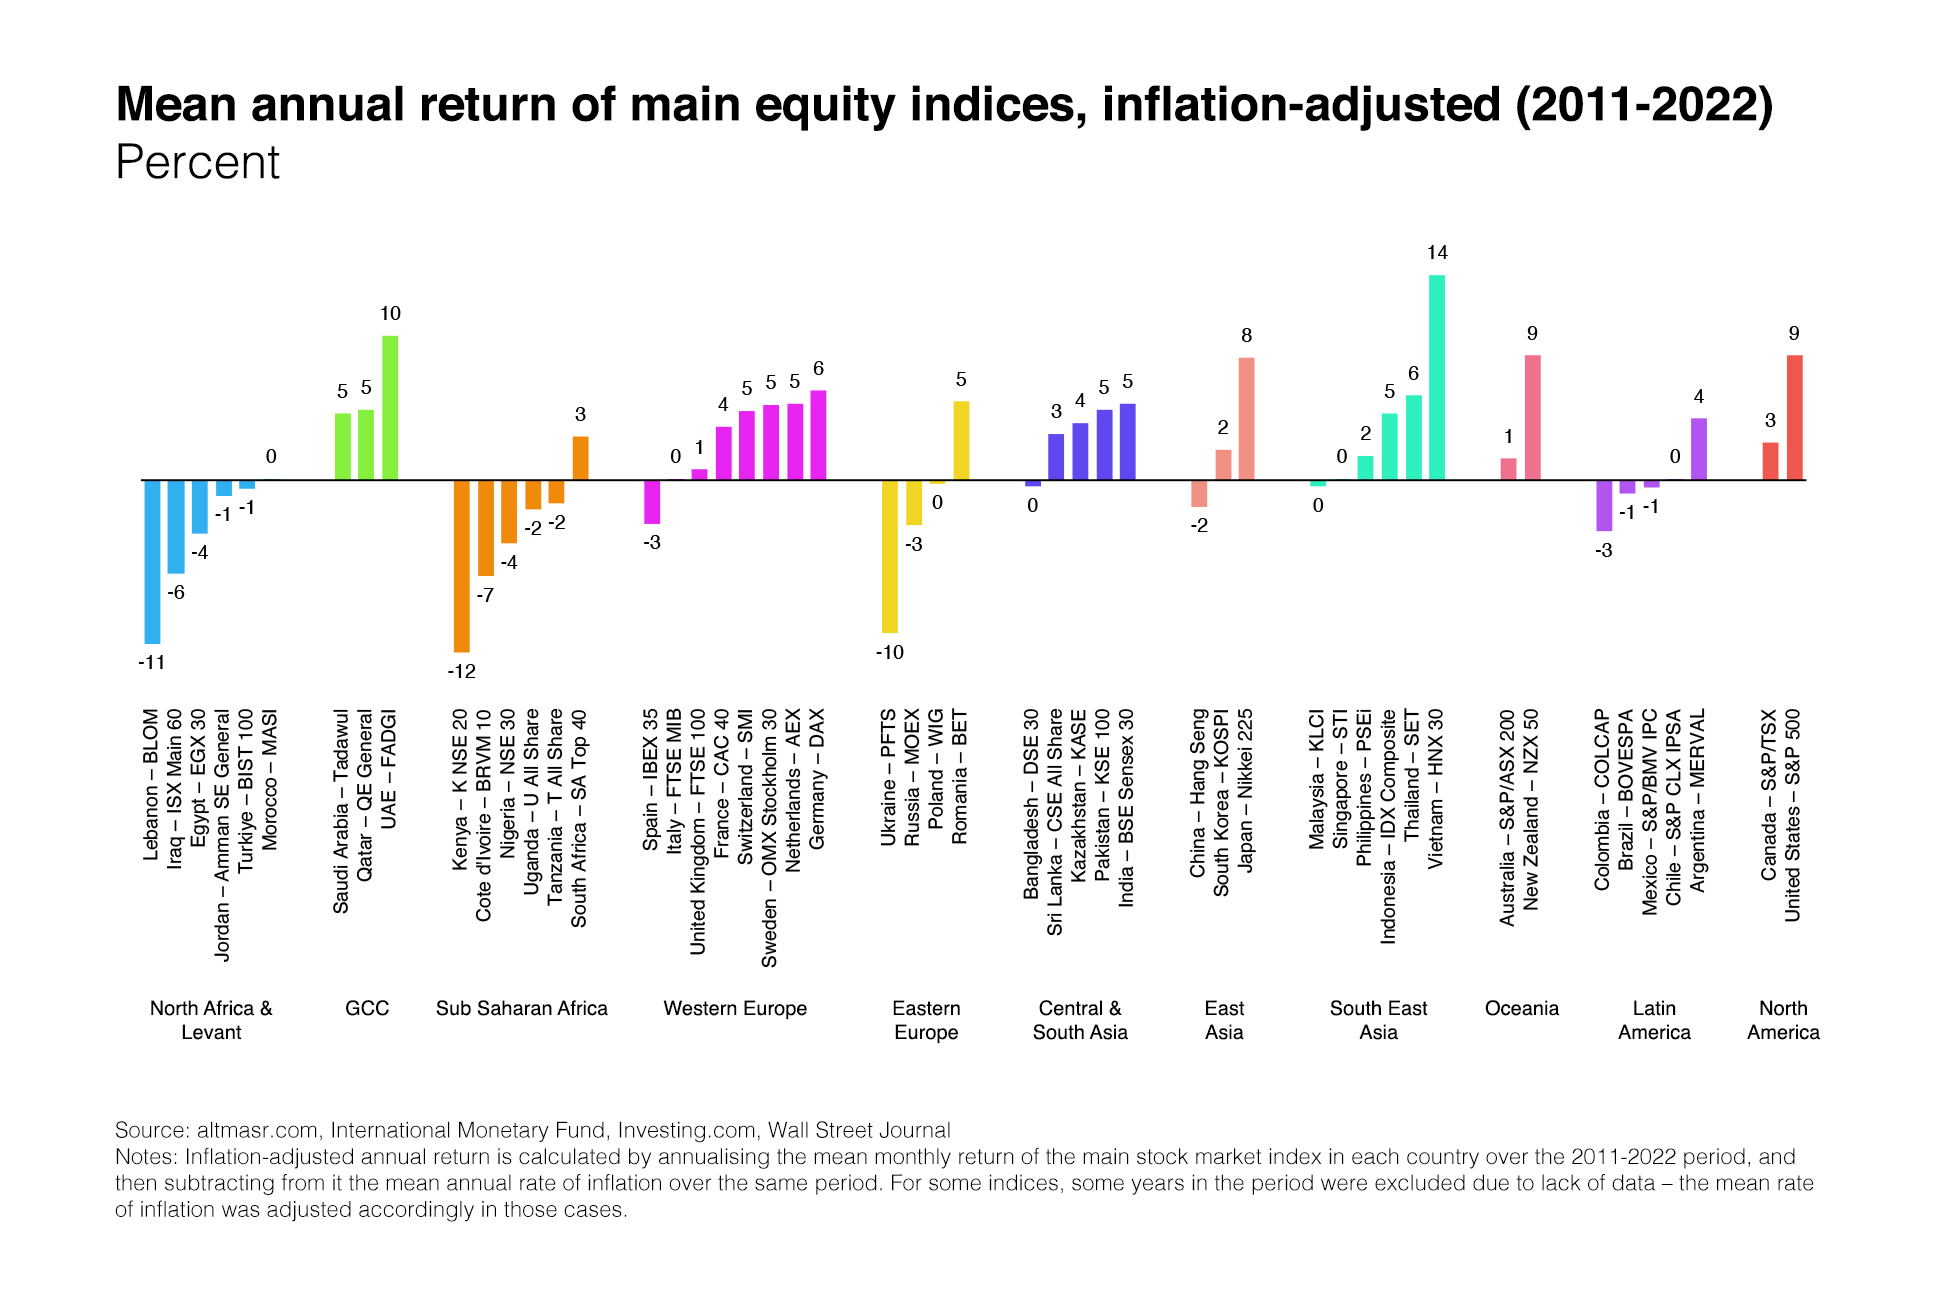 A chart showing mean annual returns on an inflation-adjusted basis for major stock indices over a period of about one decade in various countries across the globe